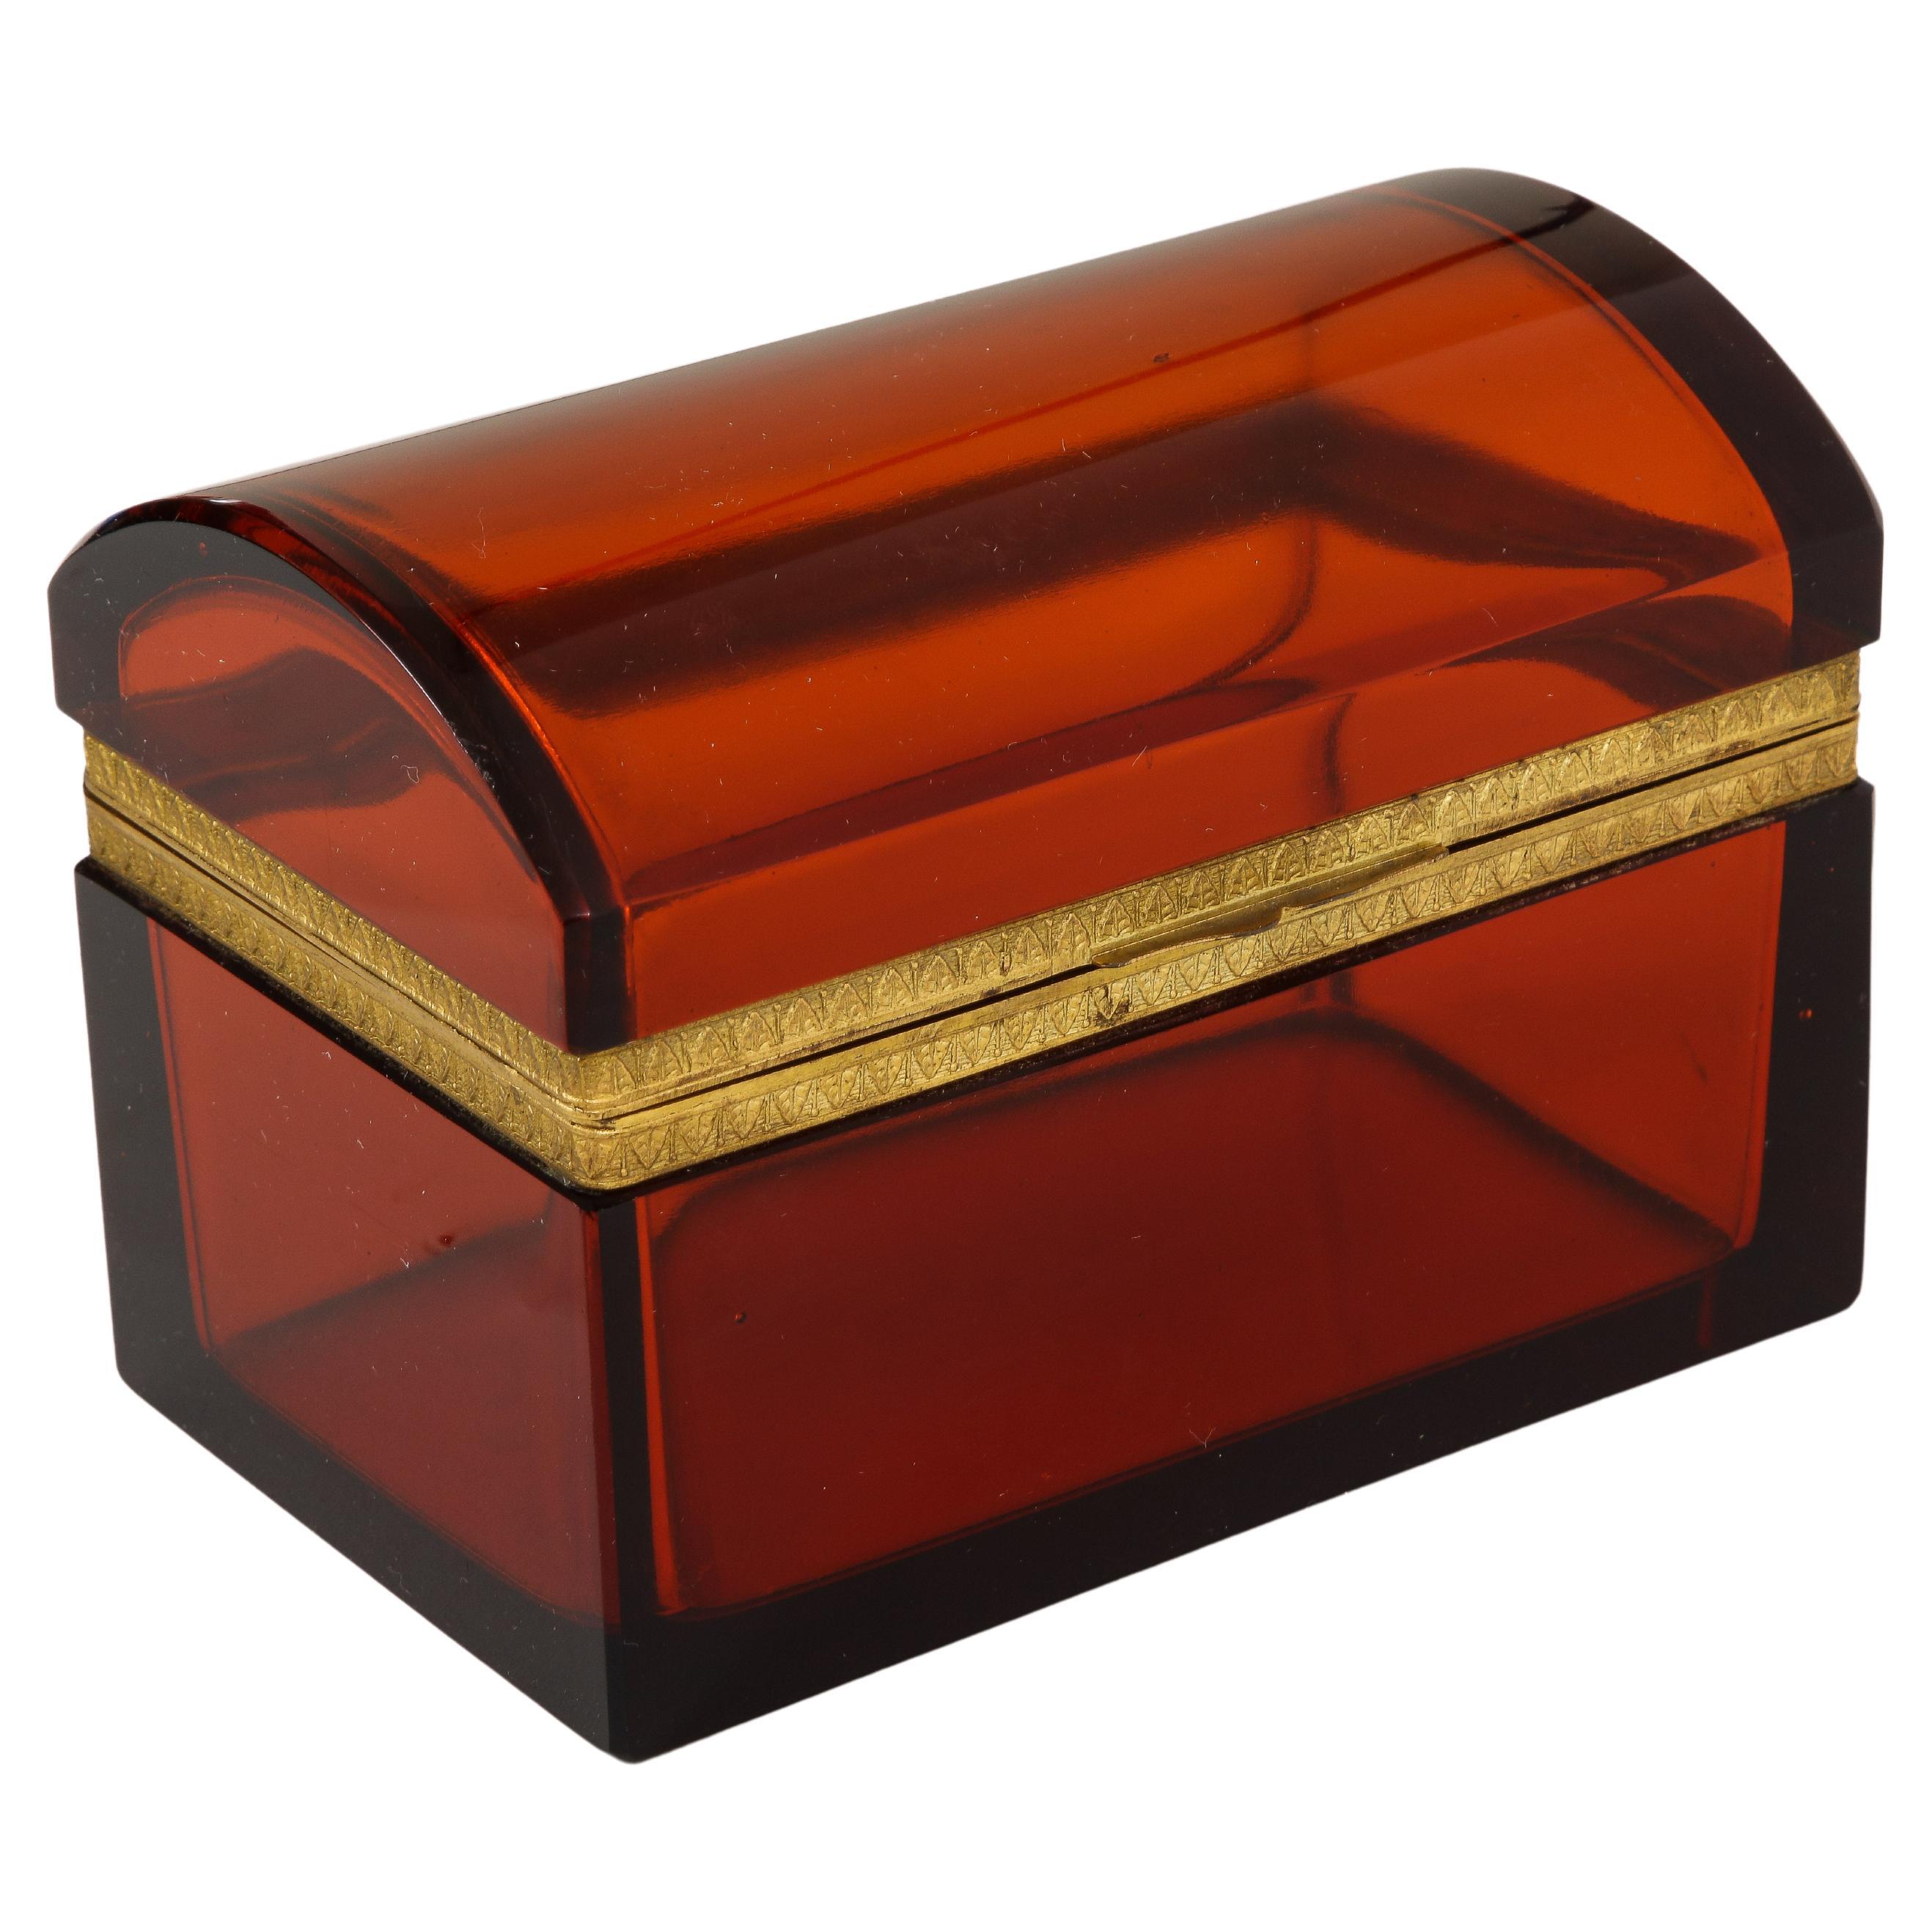 An Unusual 19th Century French Dore Bronze Mounted Orange/Red Crystal Box